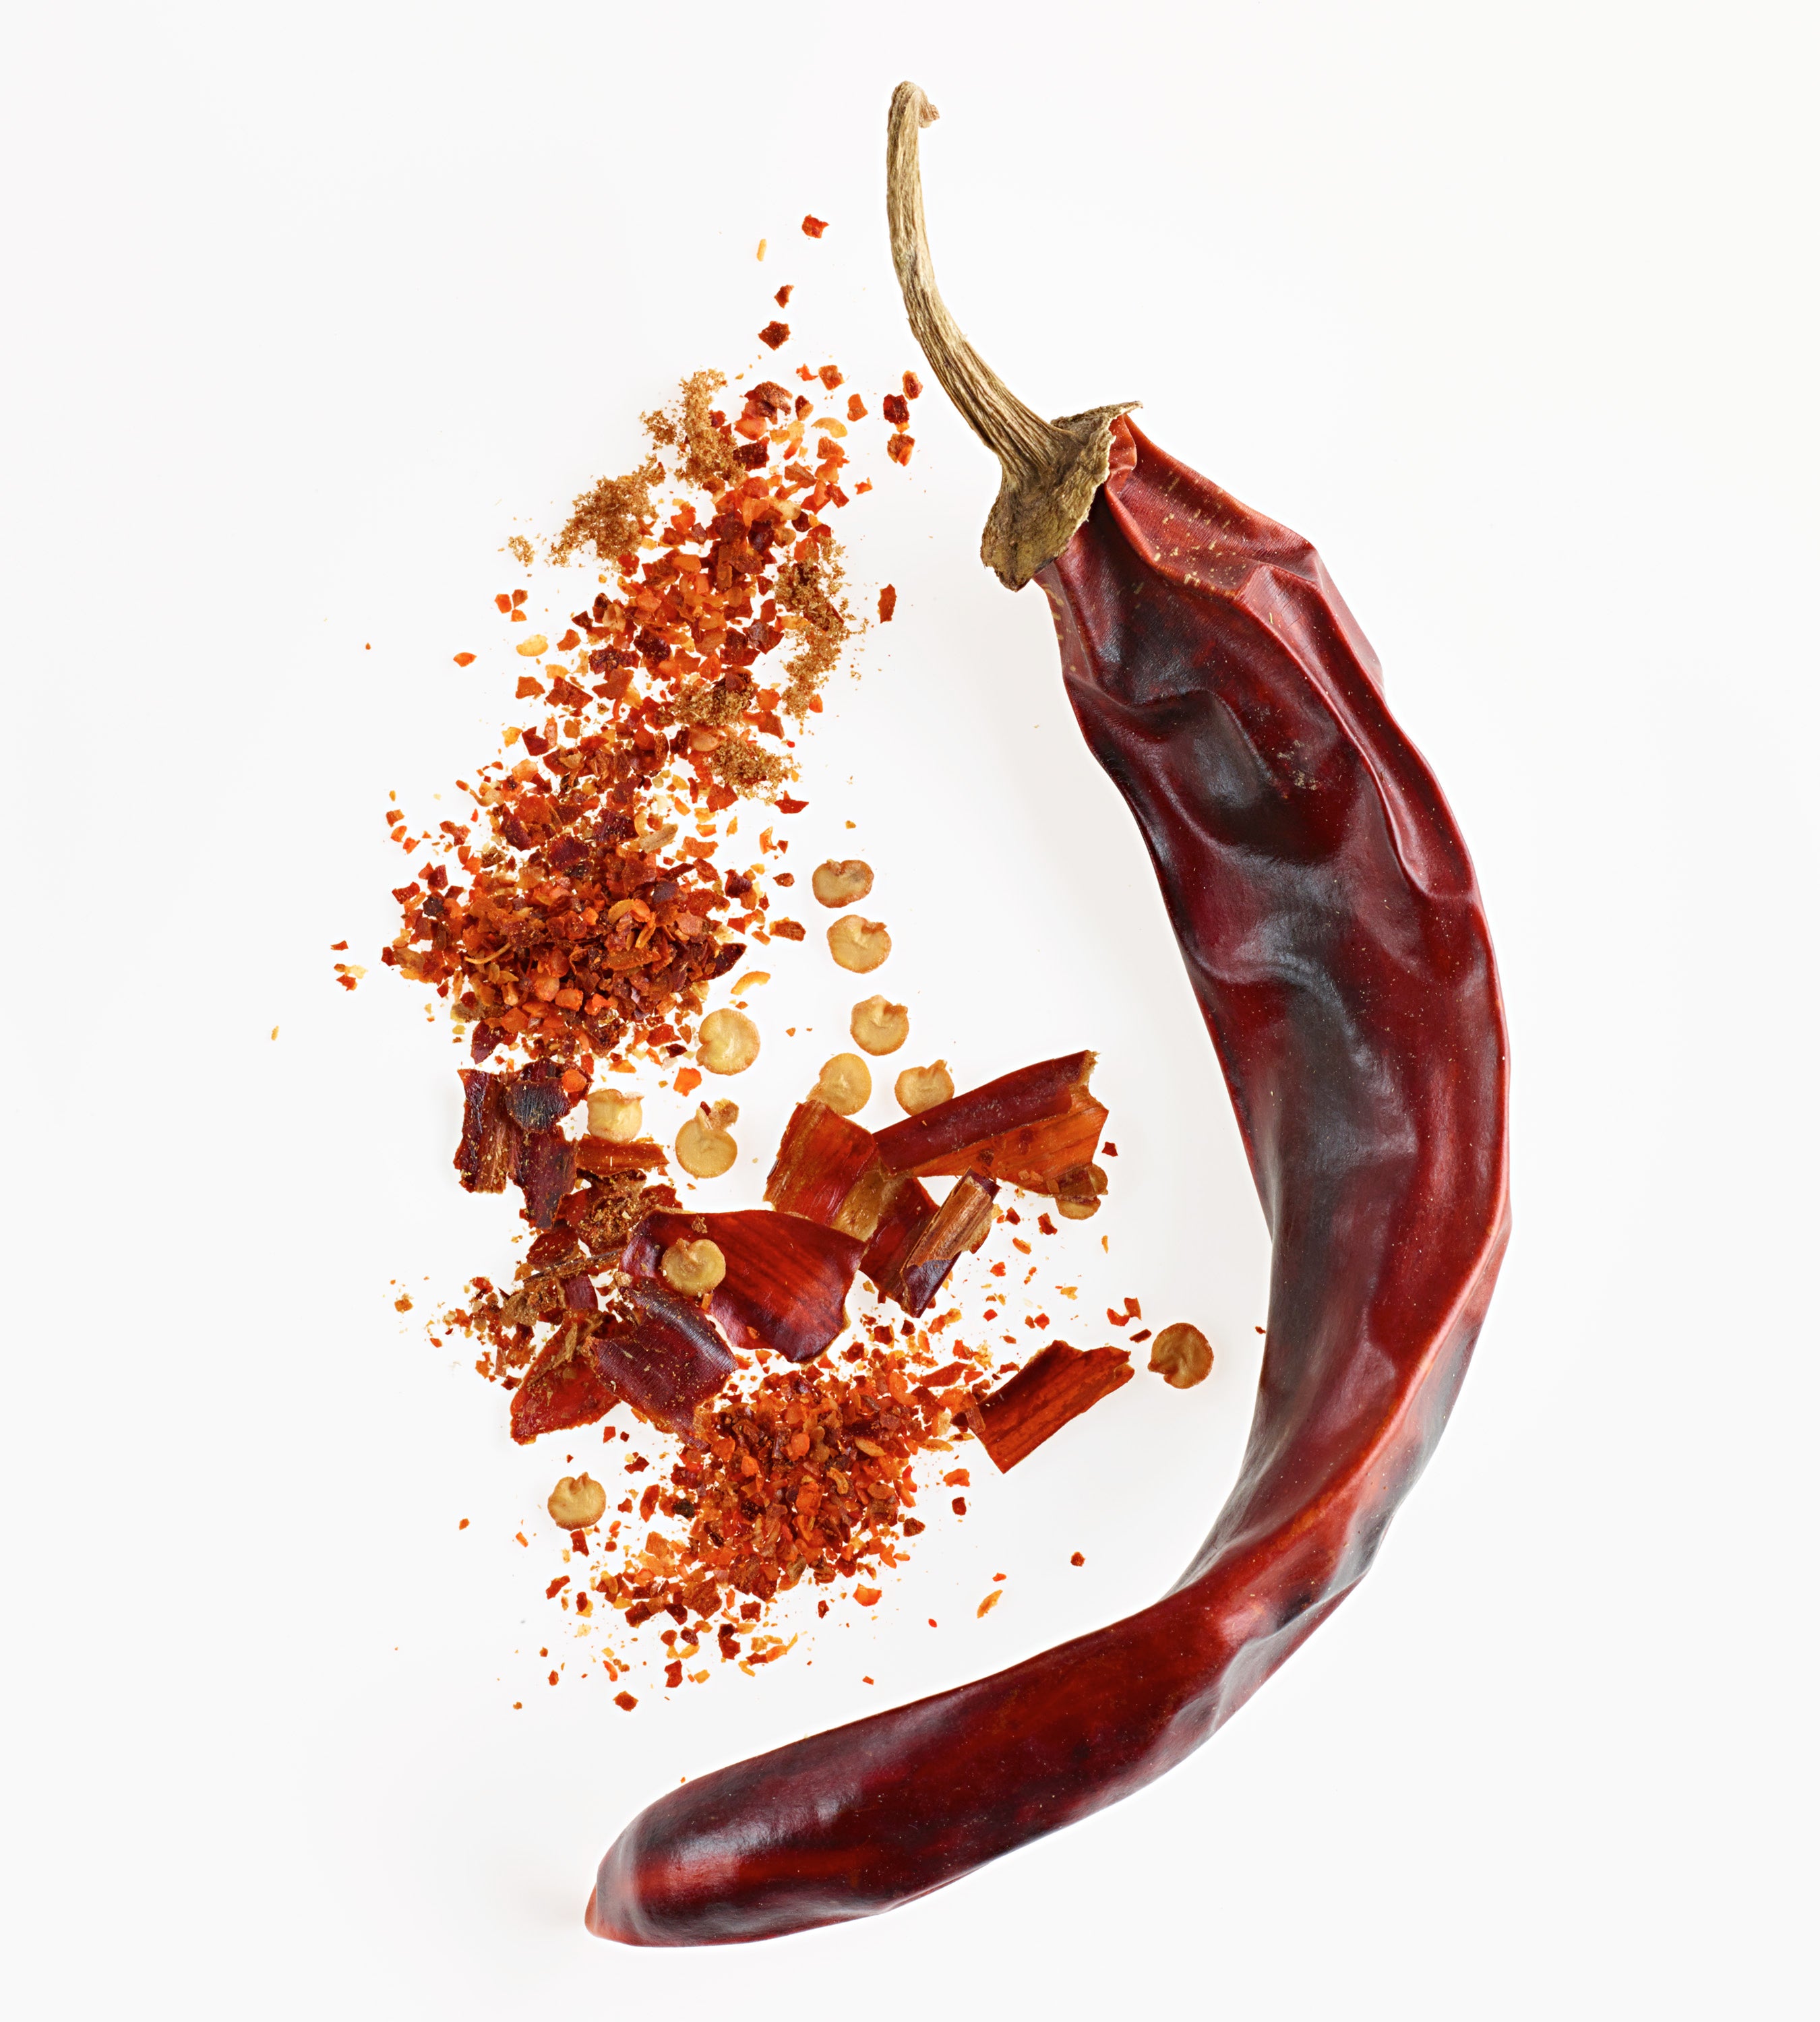 Image of dried pepperoncini chile